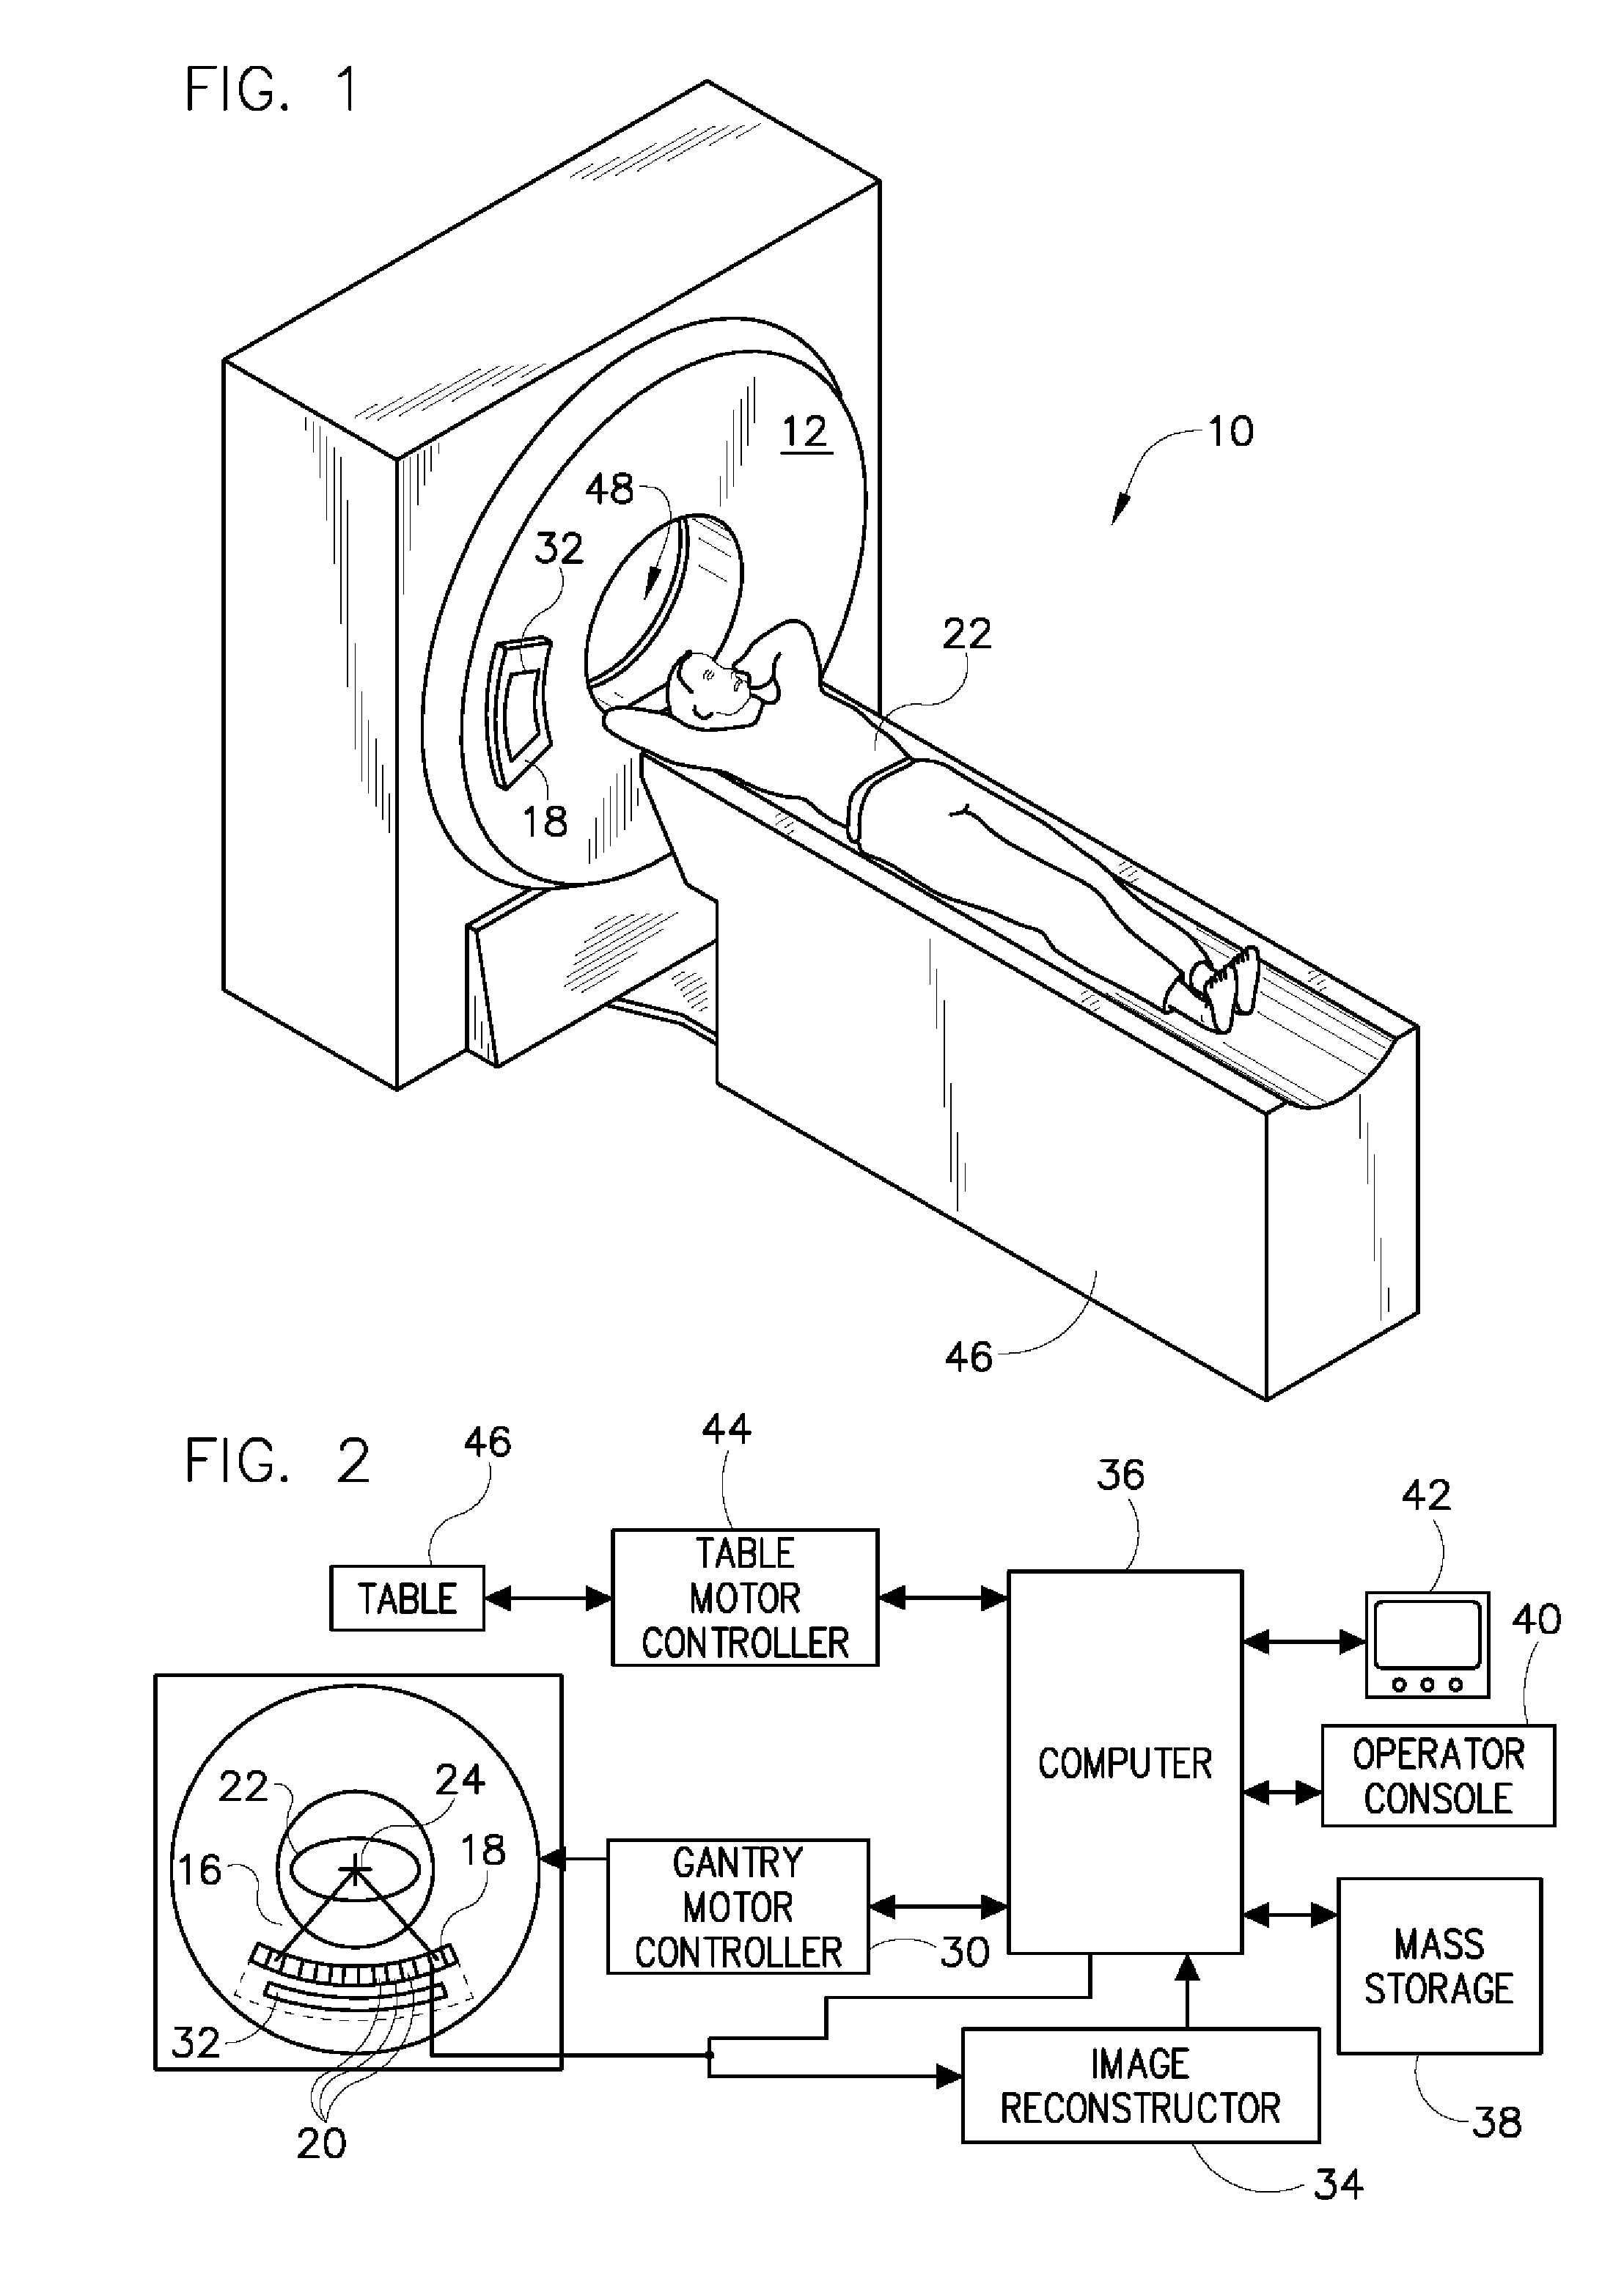 Data acquisition system for photon counting and energy discriminating detectors